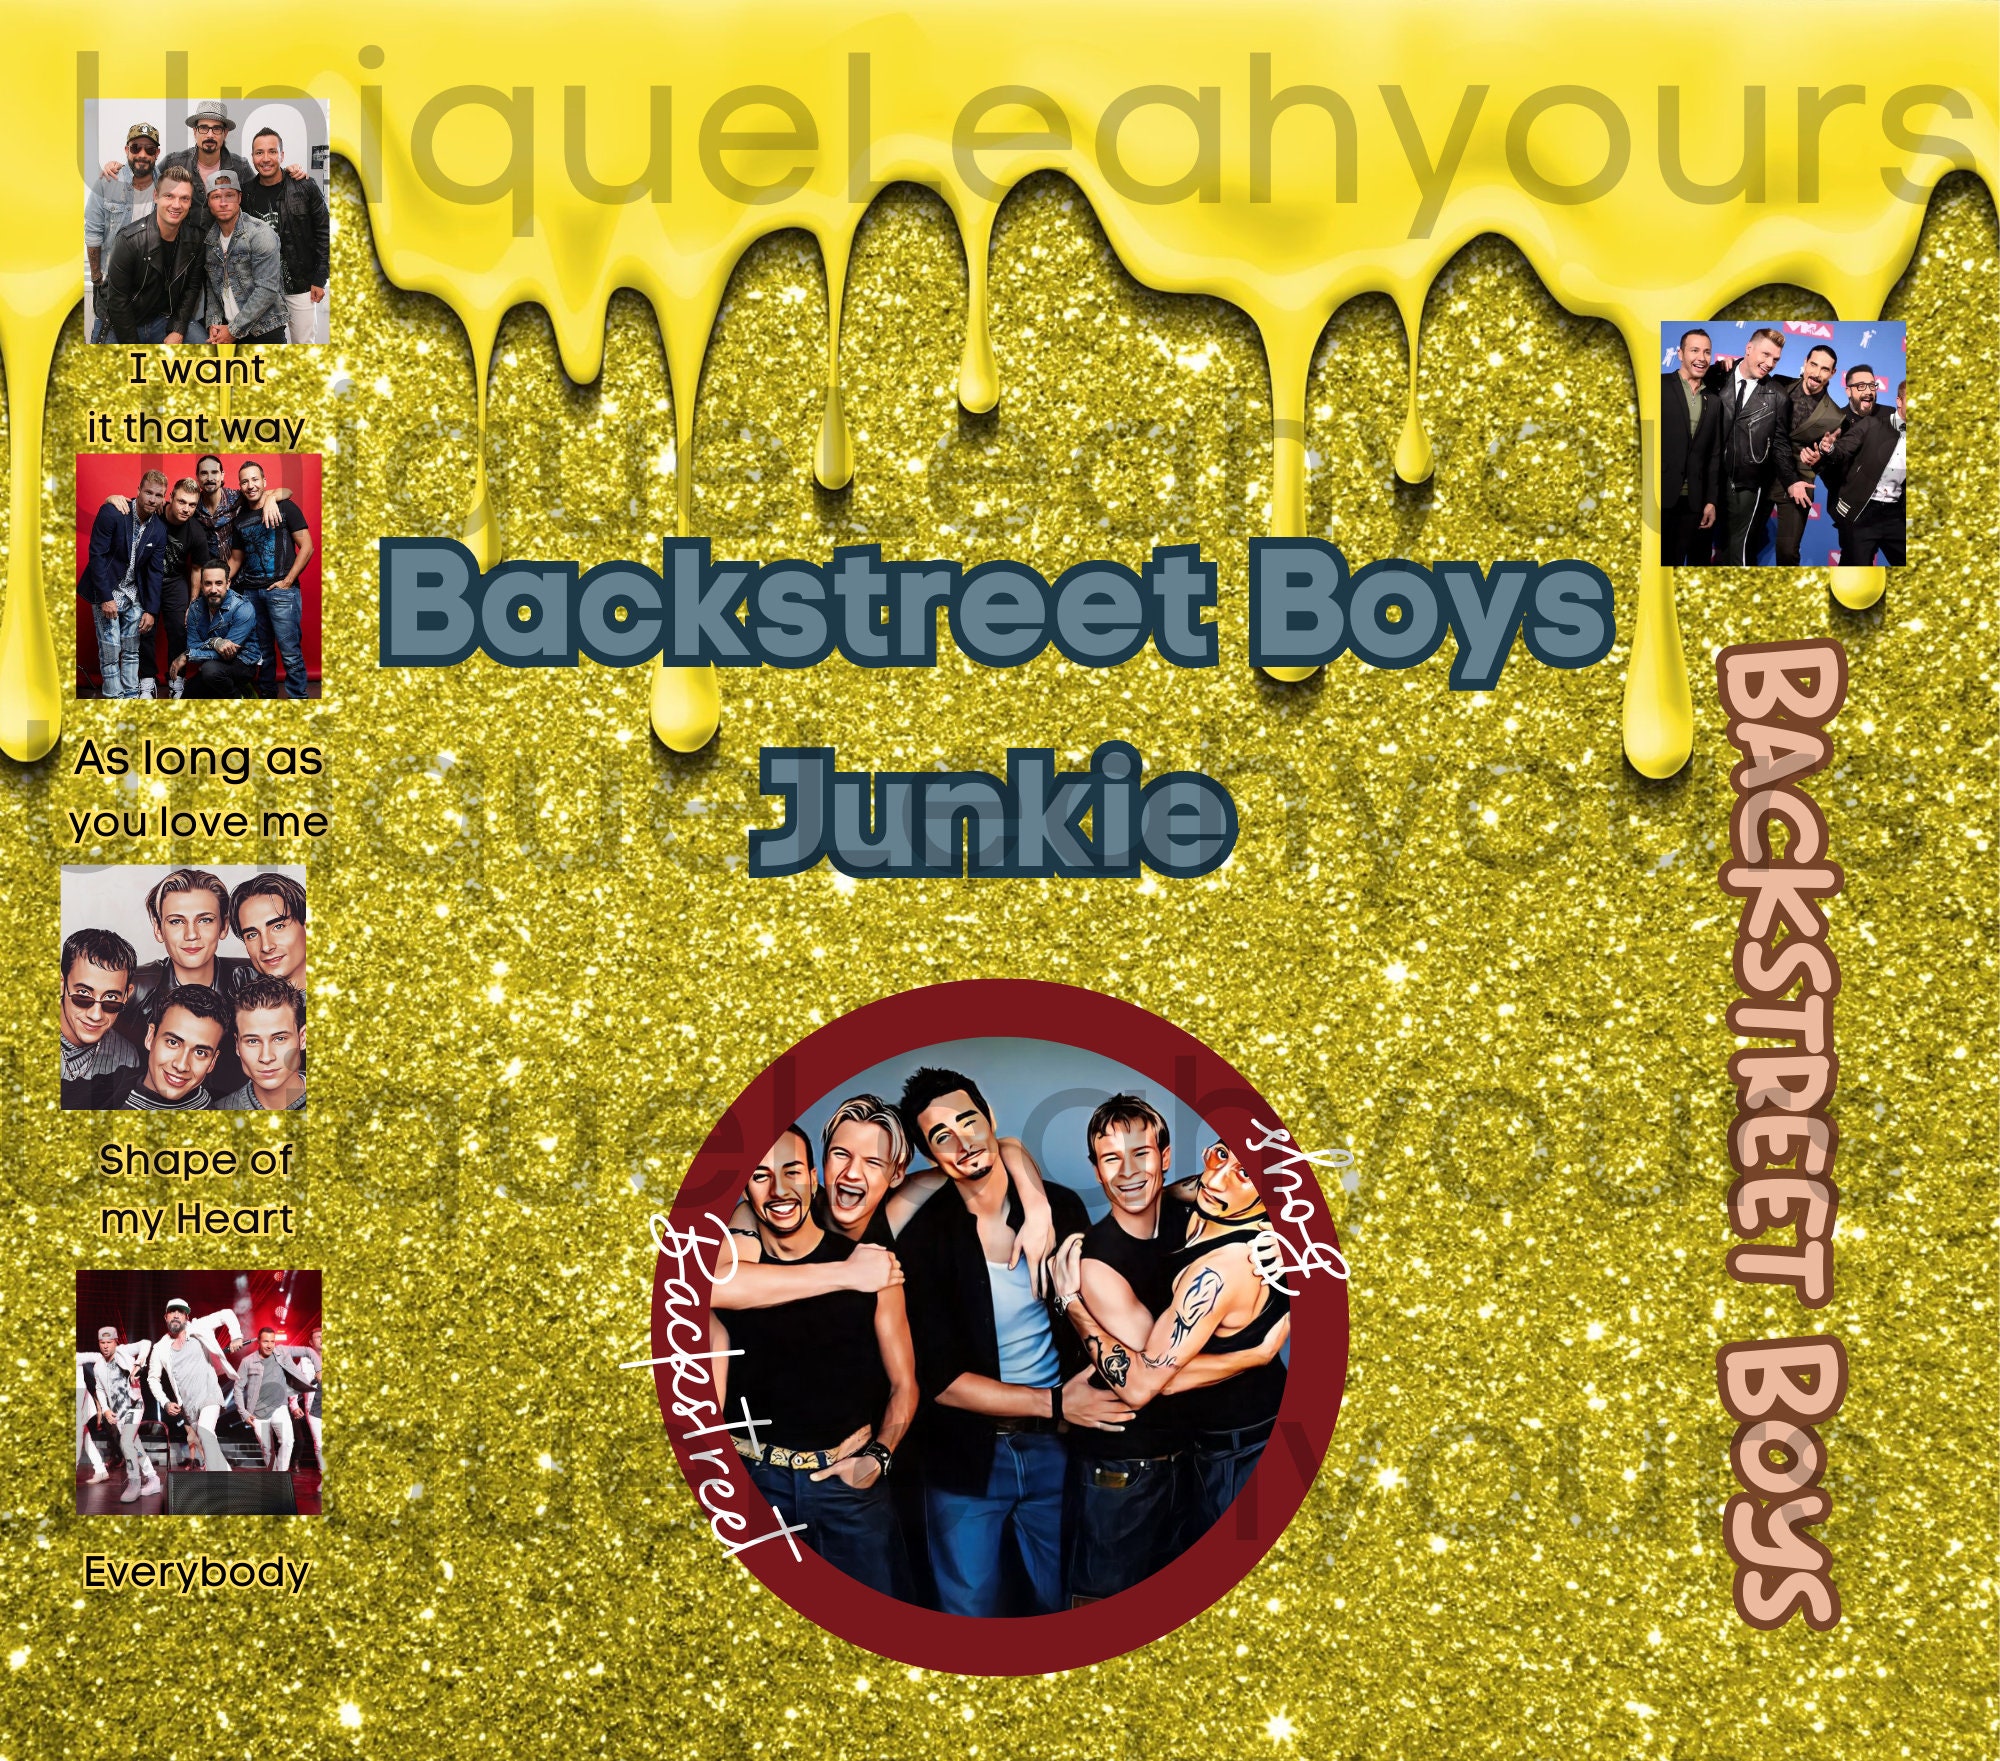 Quit Playing Games With My Heart // BSB Funny Valentines Day SVG PNG //  Backstreet Boys Lyric Quote